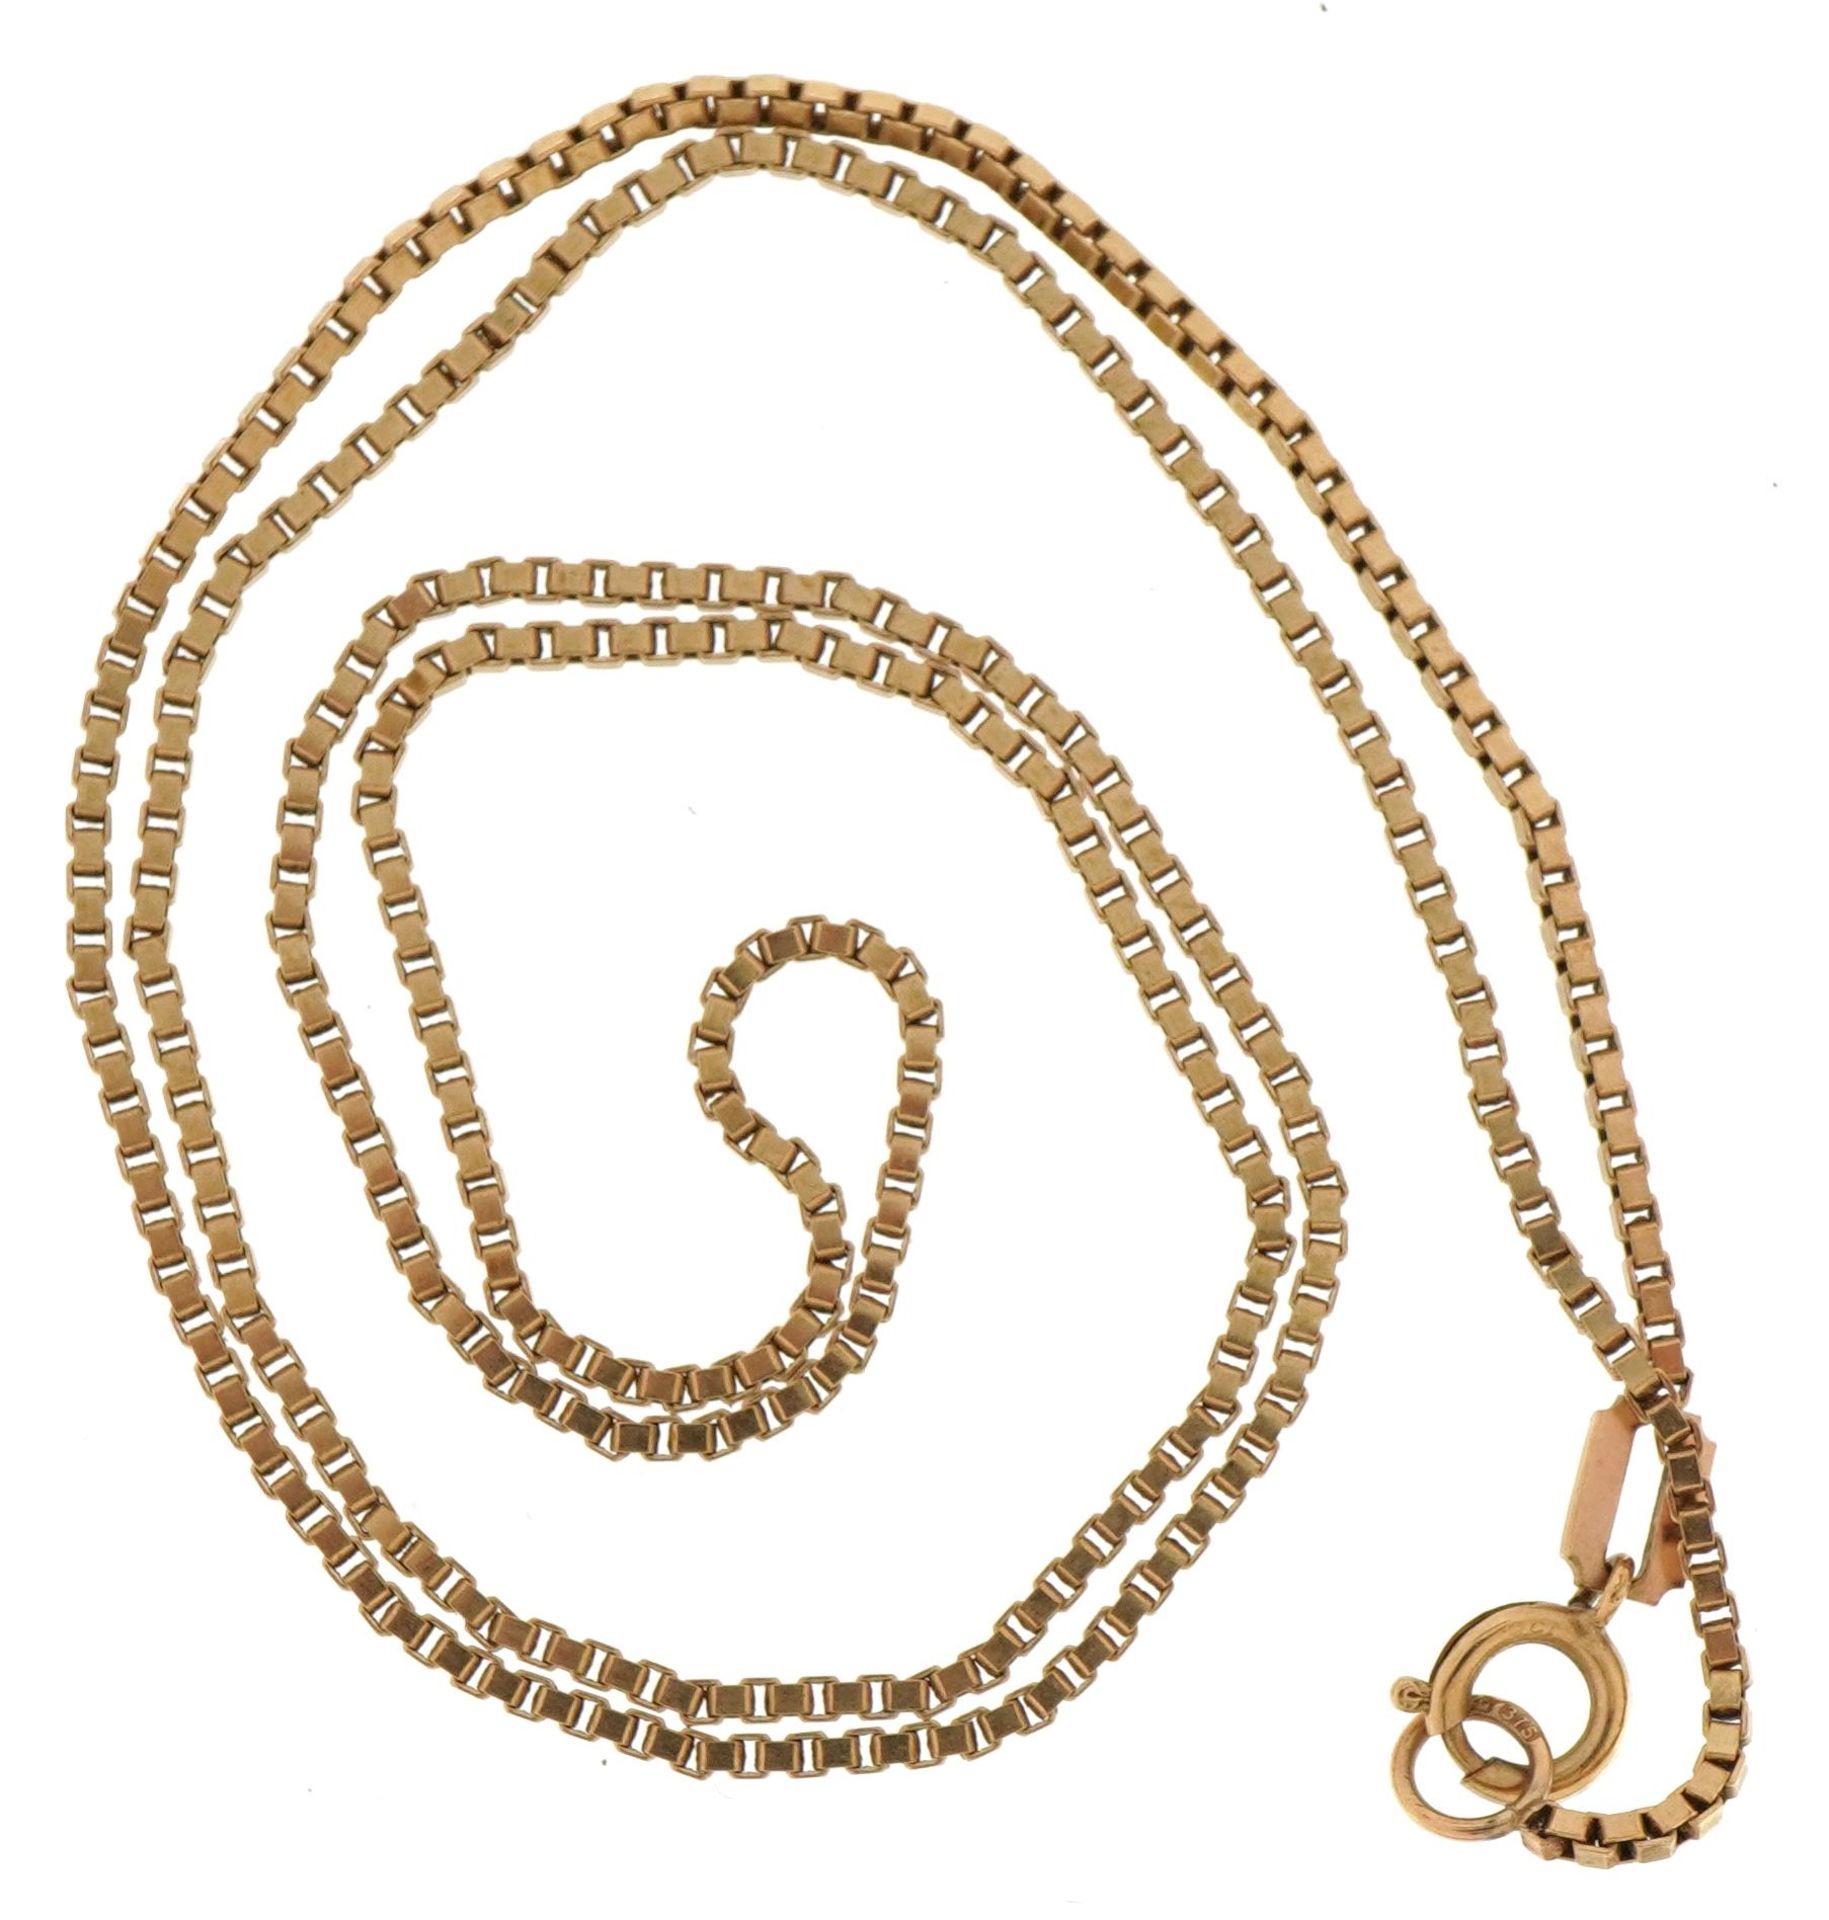 9ct gold box link necklace, 40cm in length, 3.0g : For further information on this lot please - Image 2 of 3